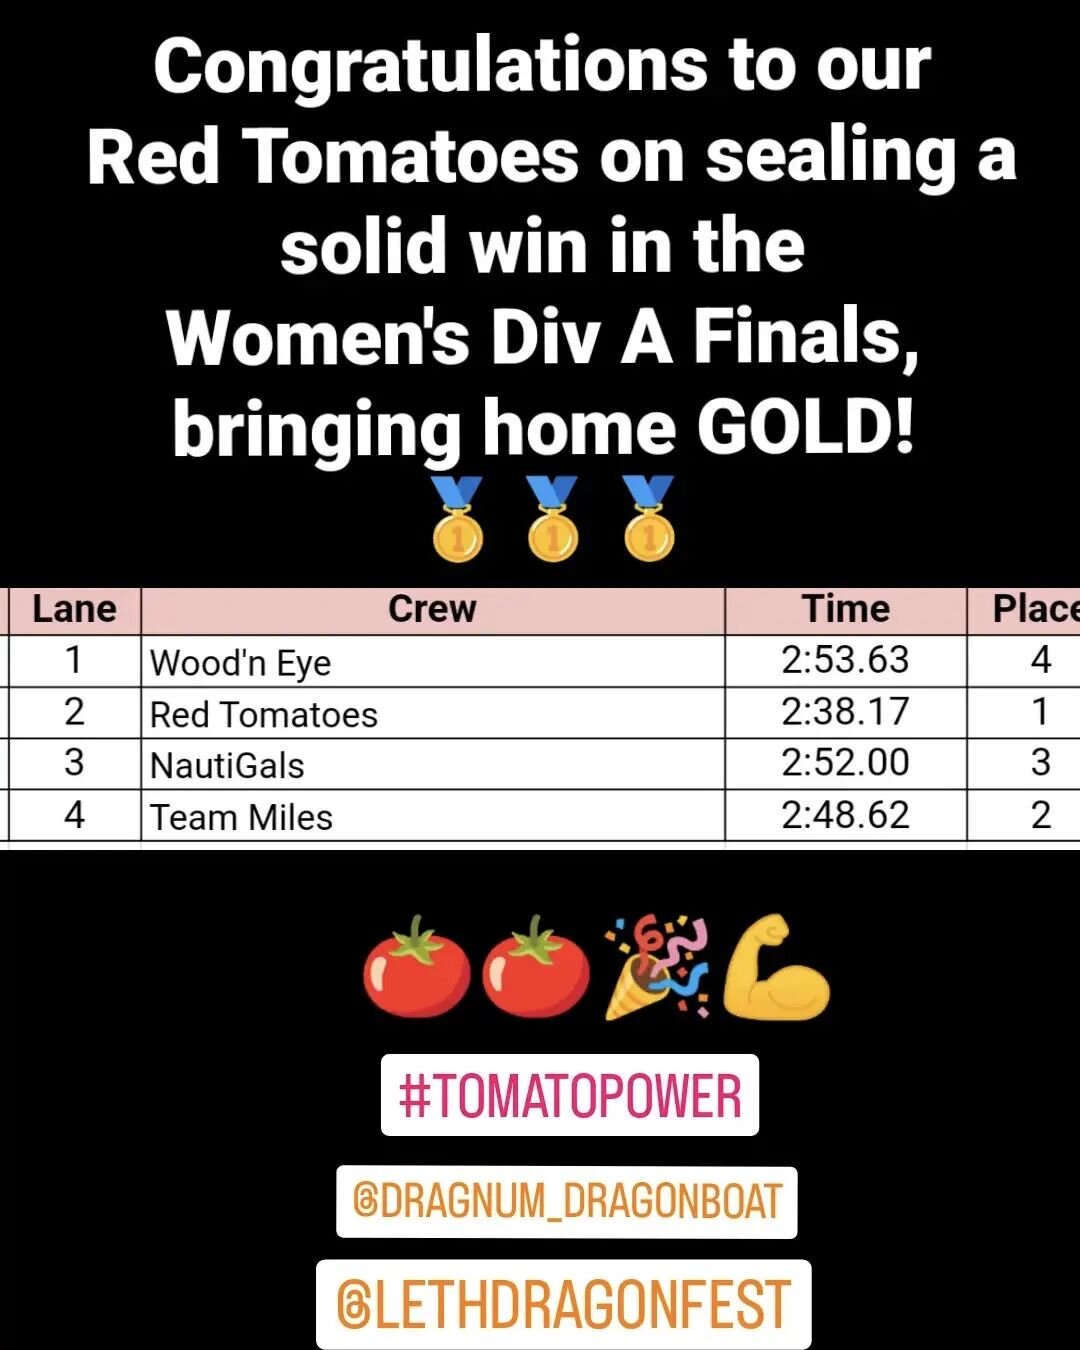 Congratulations to our Red Tomatoes on sealing a solid win in the Women's Div A Finals, bringing home GOLD! 🥇🥇🥇🍅🍅🍅💪❤️
.
.
#lethdragonfest22 #lethdragonfest #redtomatoes #dragnumdragonboat #redeyesdragonboat #yycdbs #paddlesupyyc #strongwomen